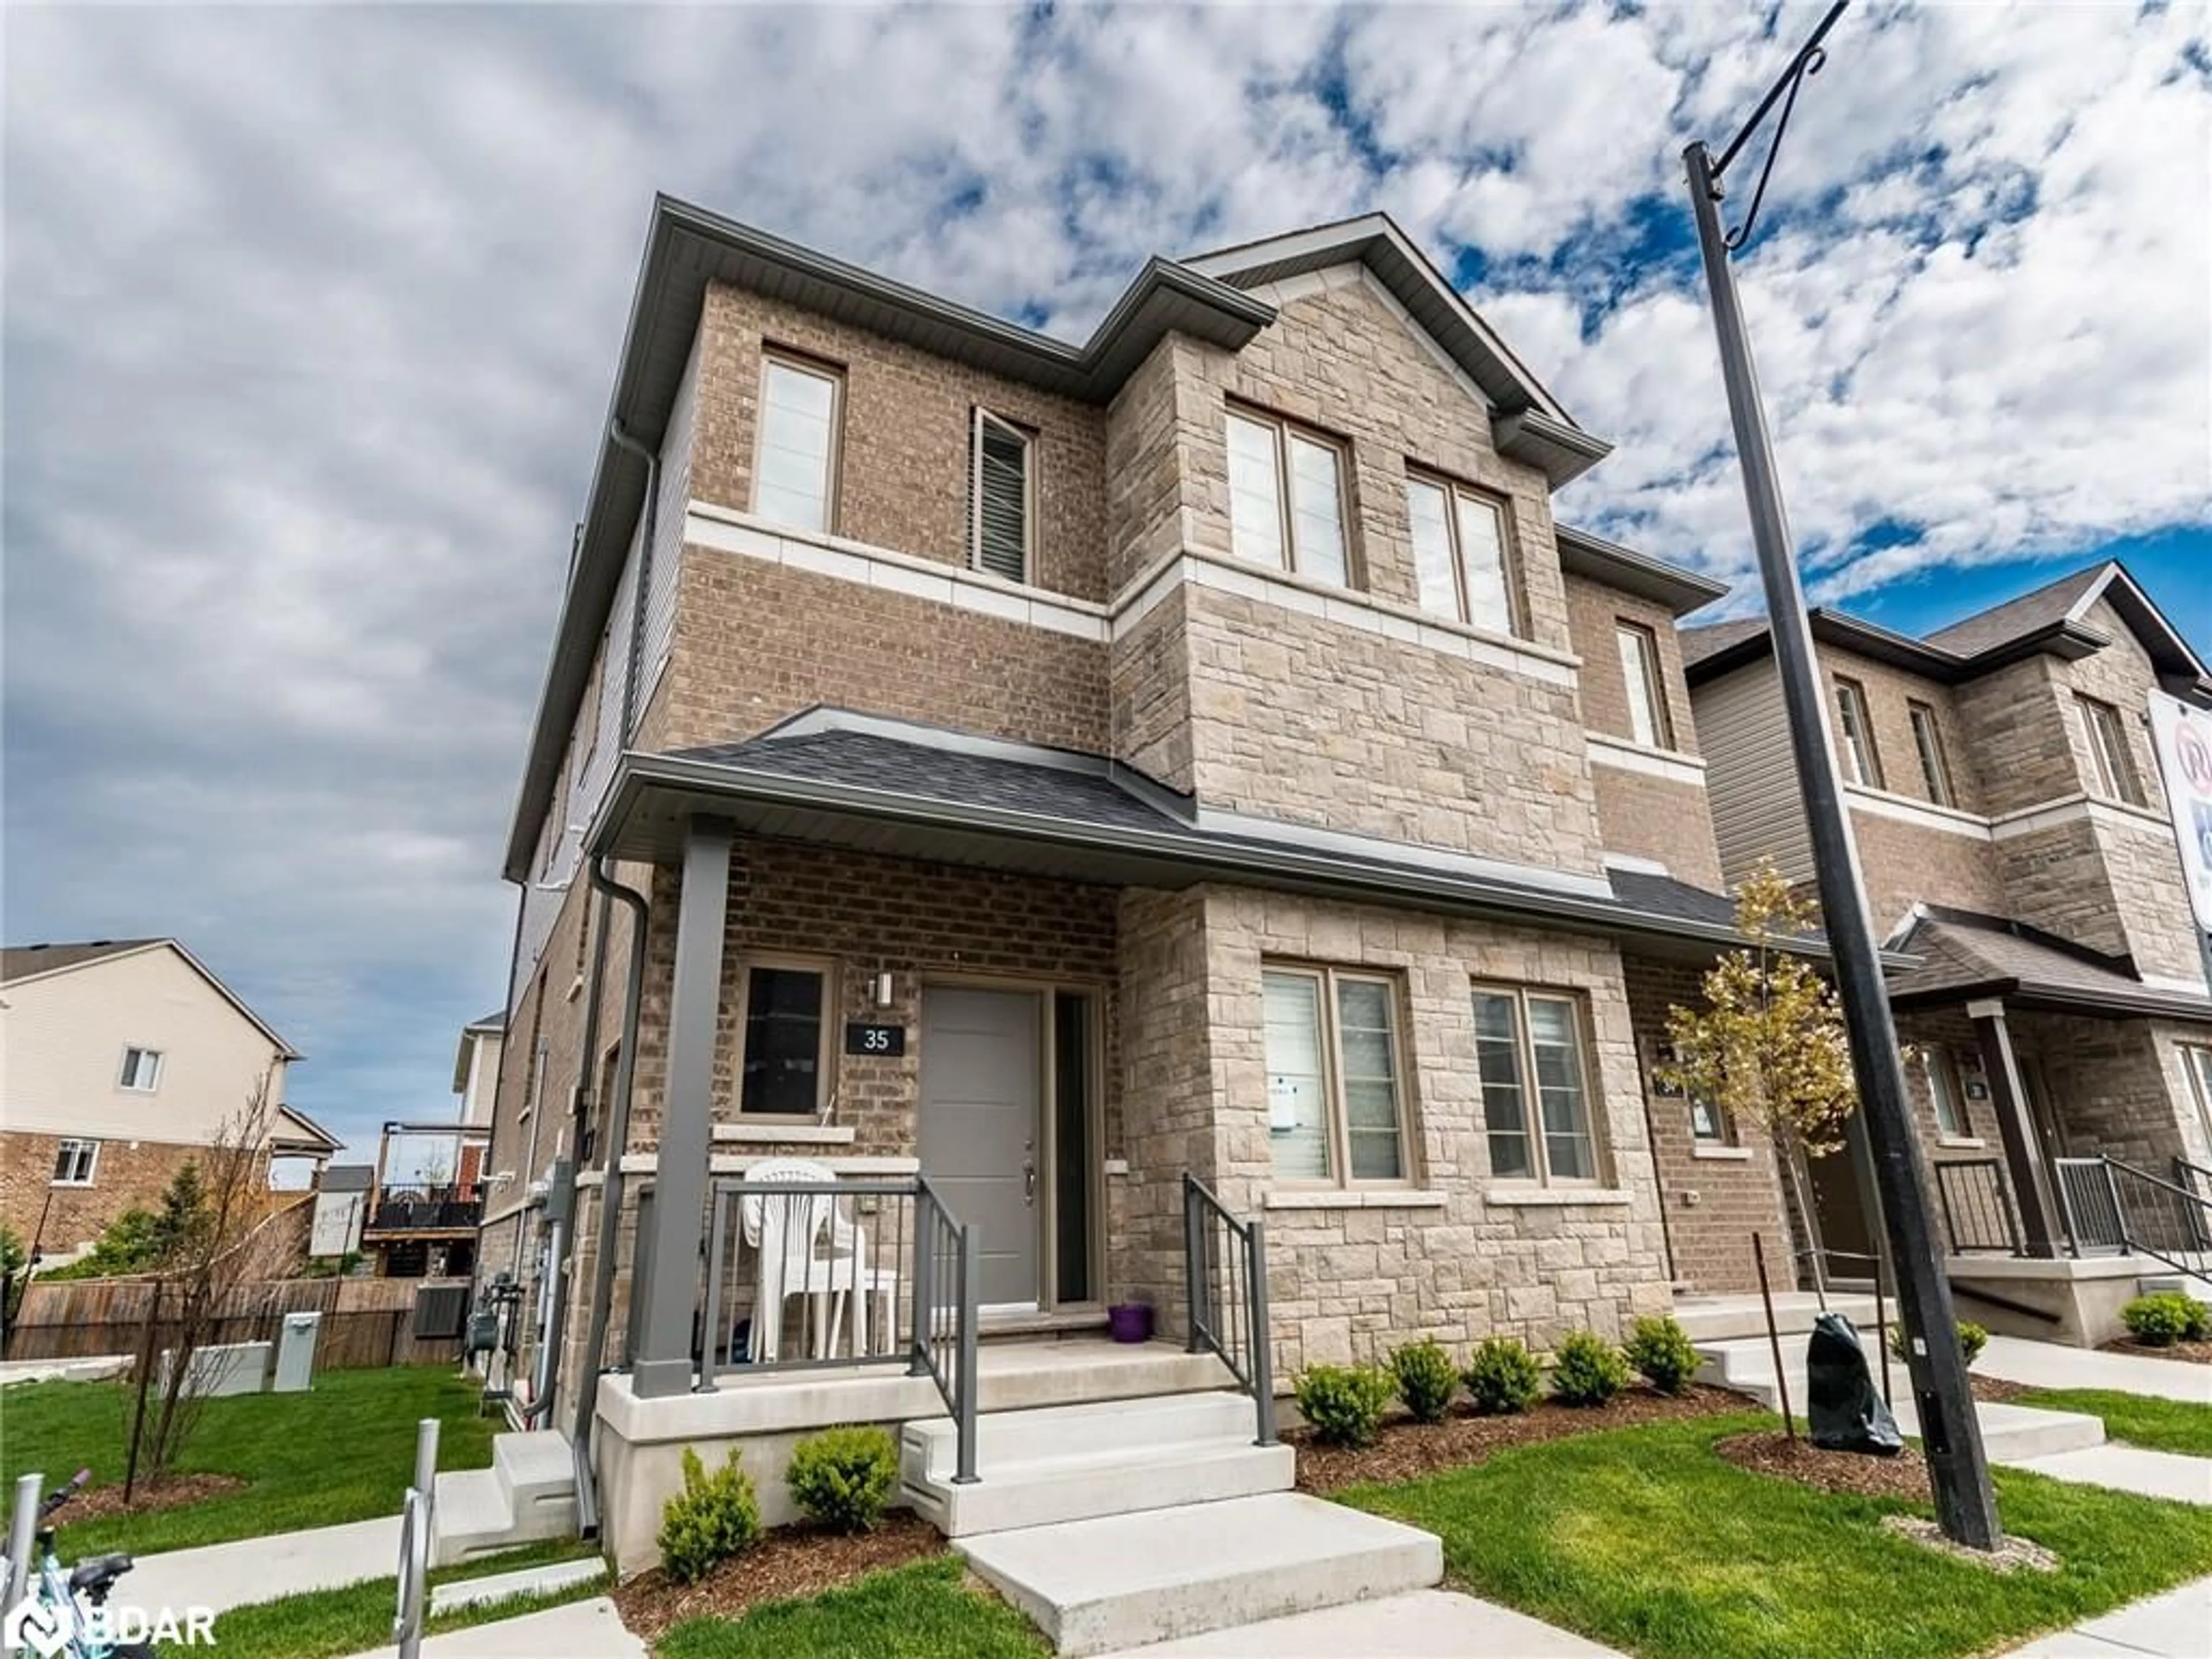 Home with brick exterior material for 205 West Oak Trail #35, Kitchener Ontario N2R 0R9